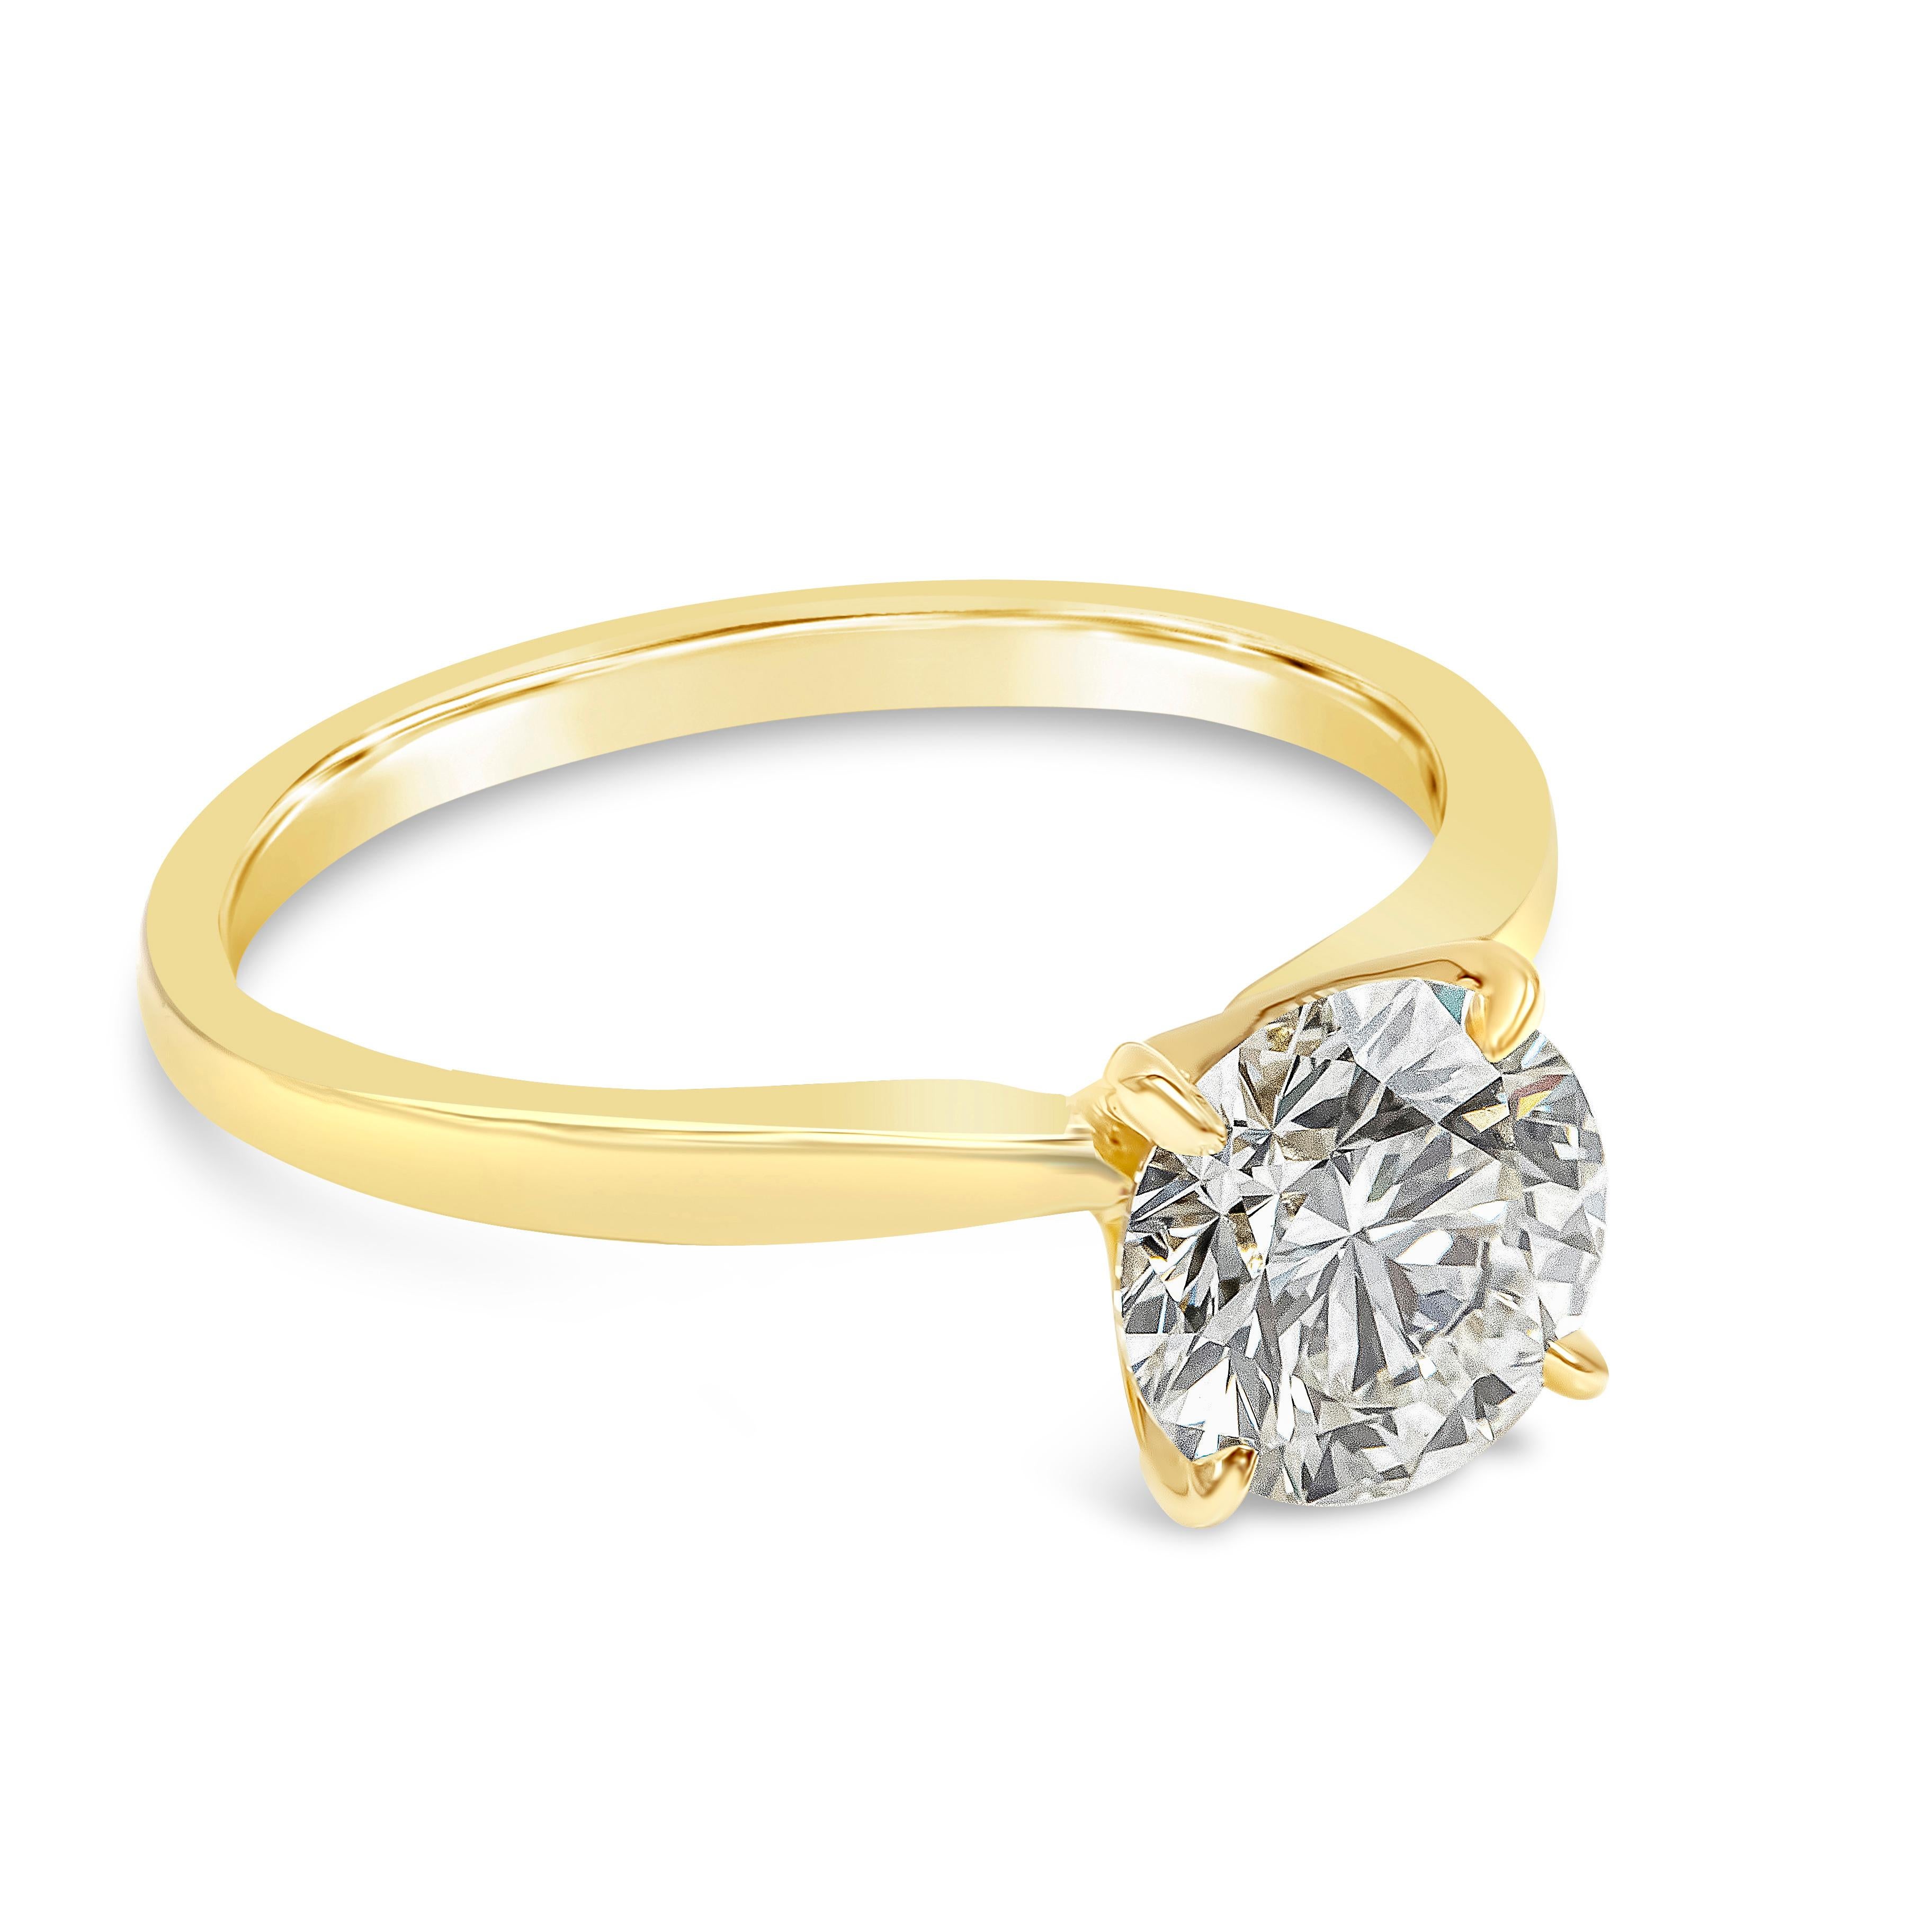 A classic and timeless solitaire engagement ring style showcasing a GIA Certified 1.38 carat total round brilliant diamond, J Color and VS1 in Clarity. In a traditional solitaire 4-prong setting. Made with 18K Yellow Gold. Size 6 US

Style available